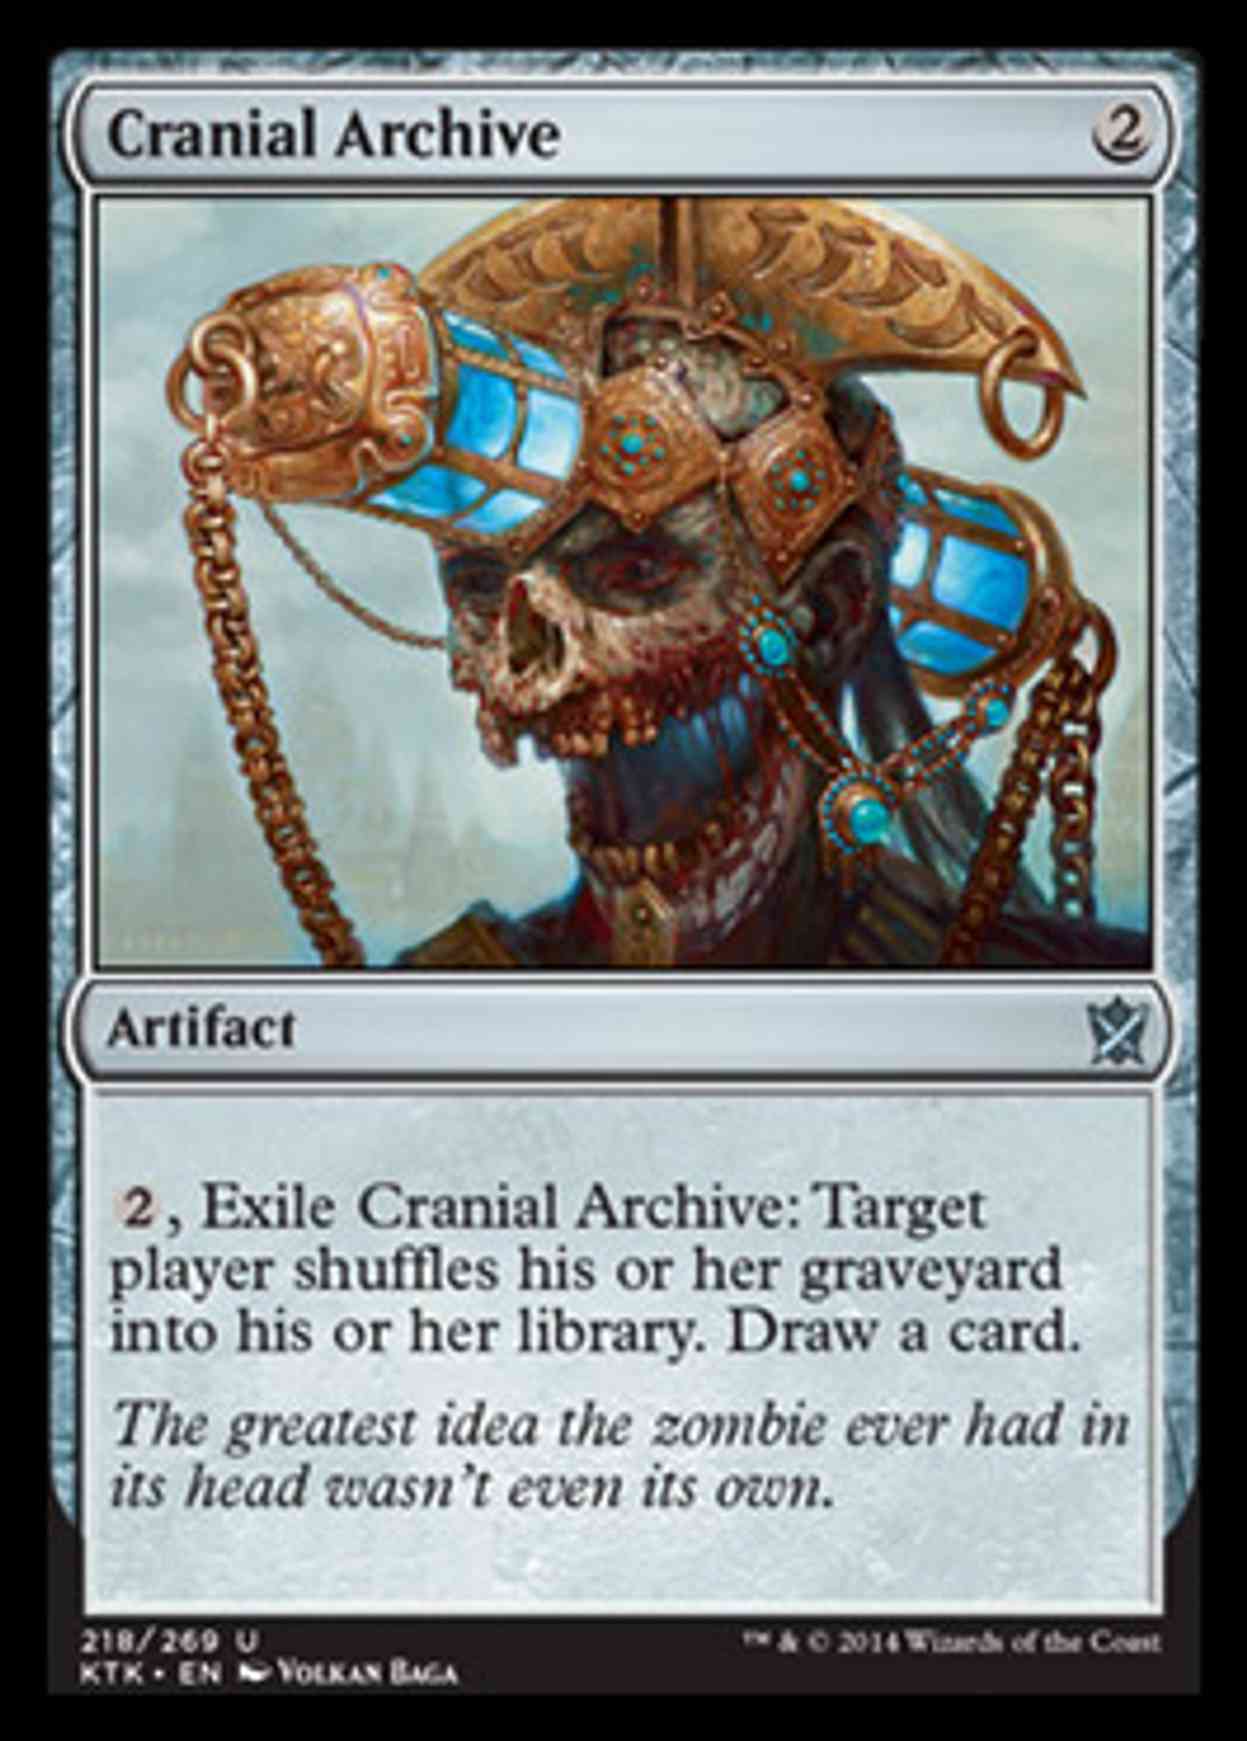 Cranial Archive magic card front